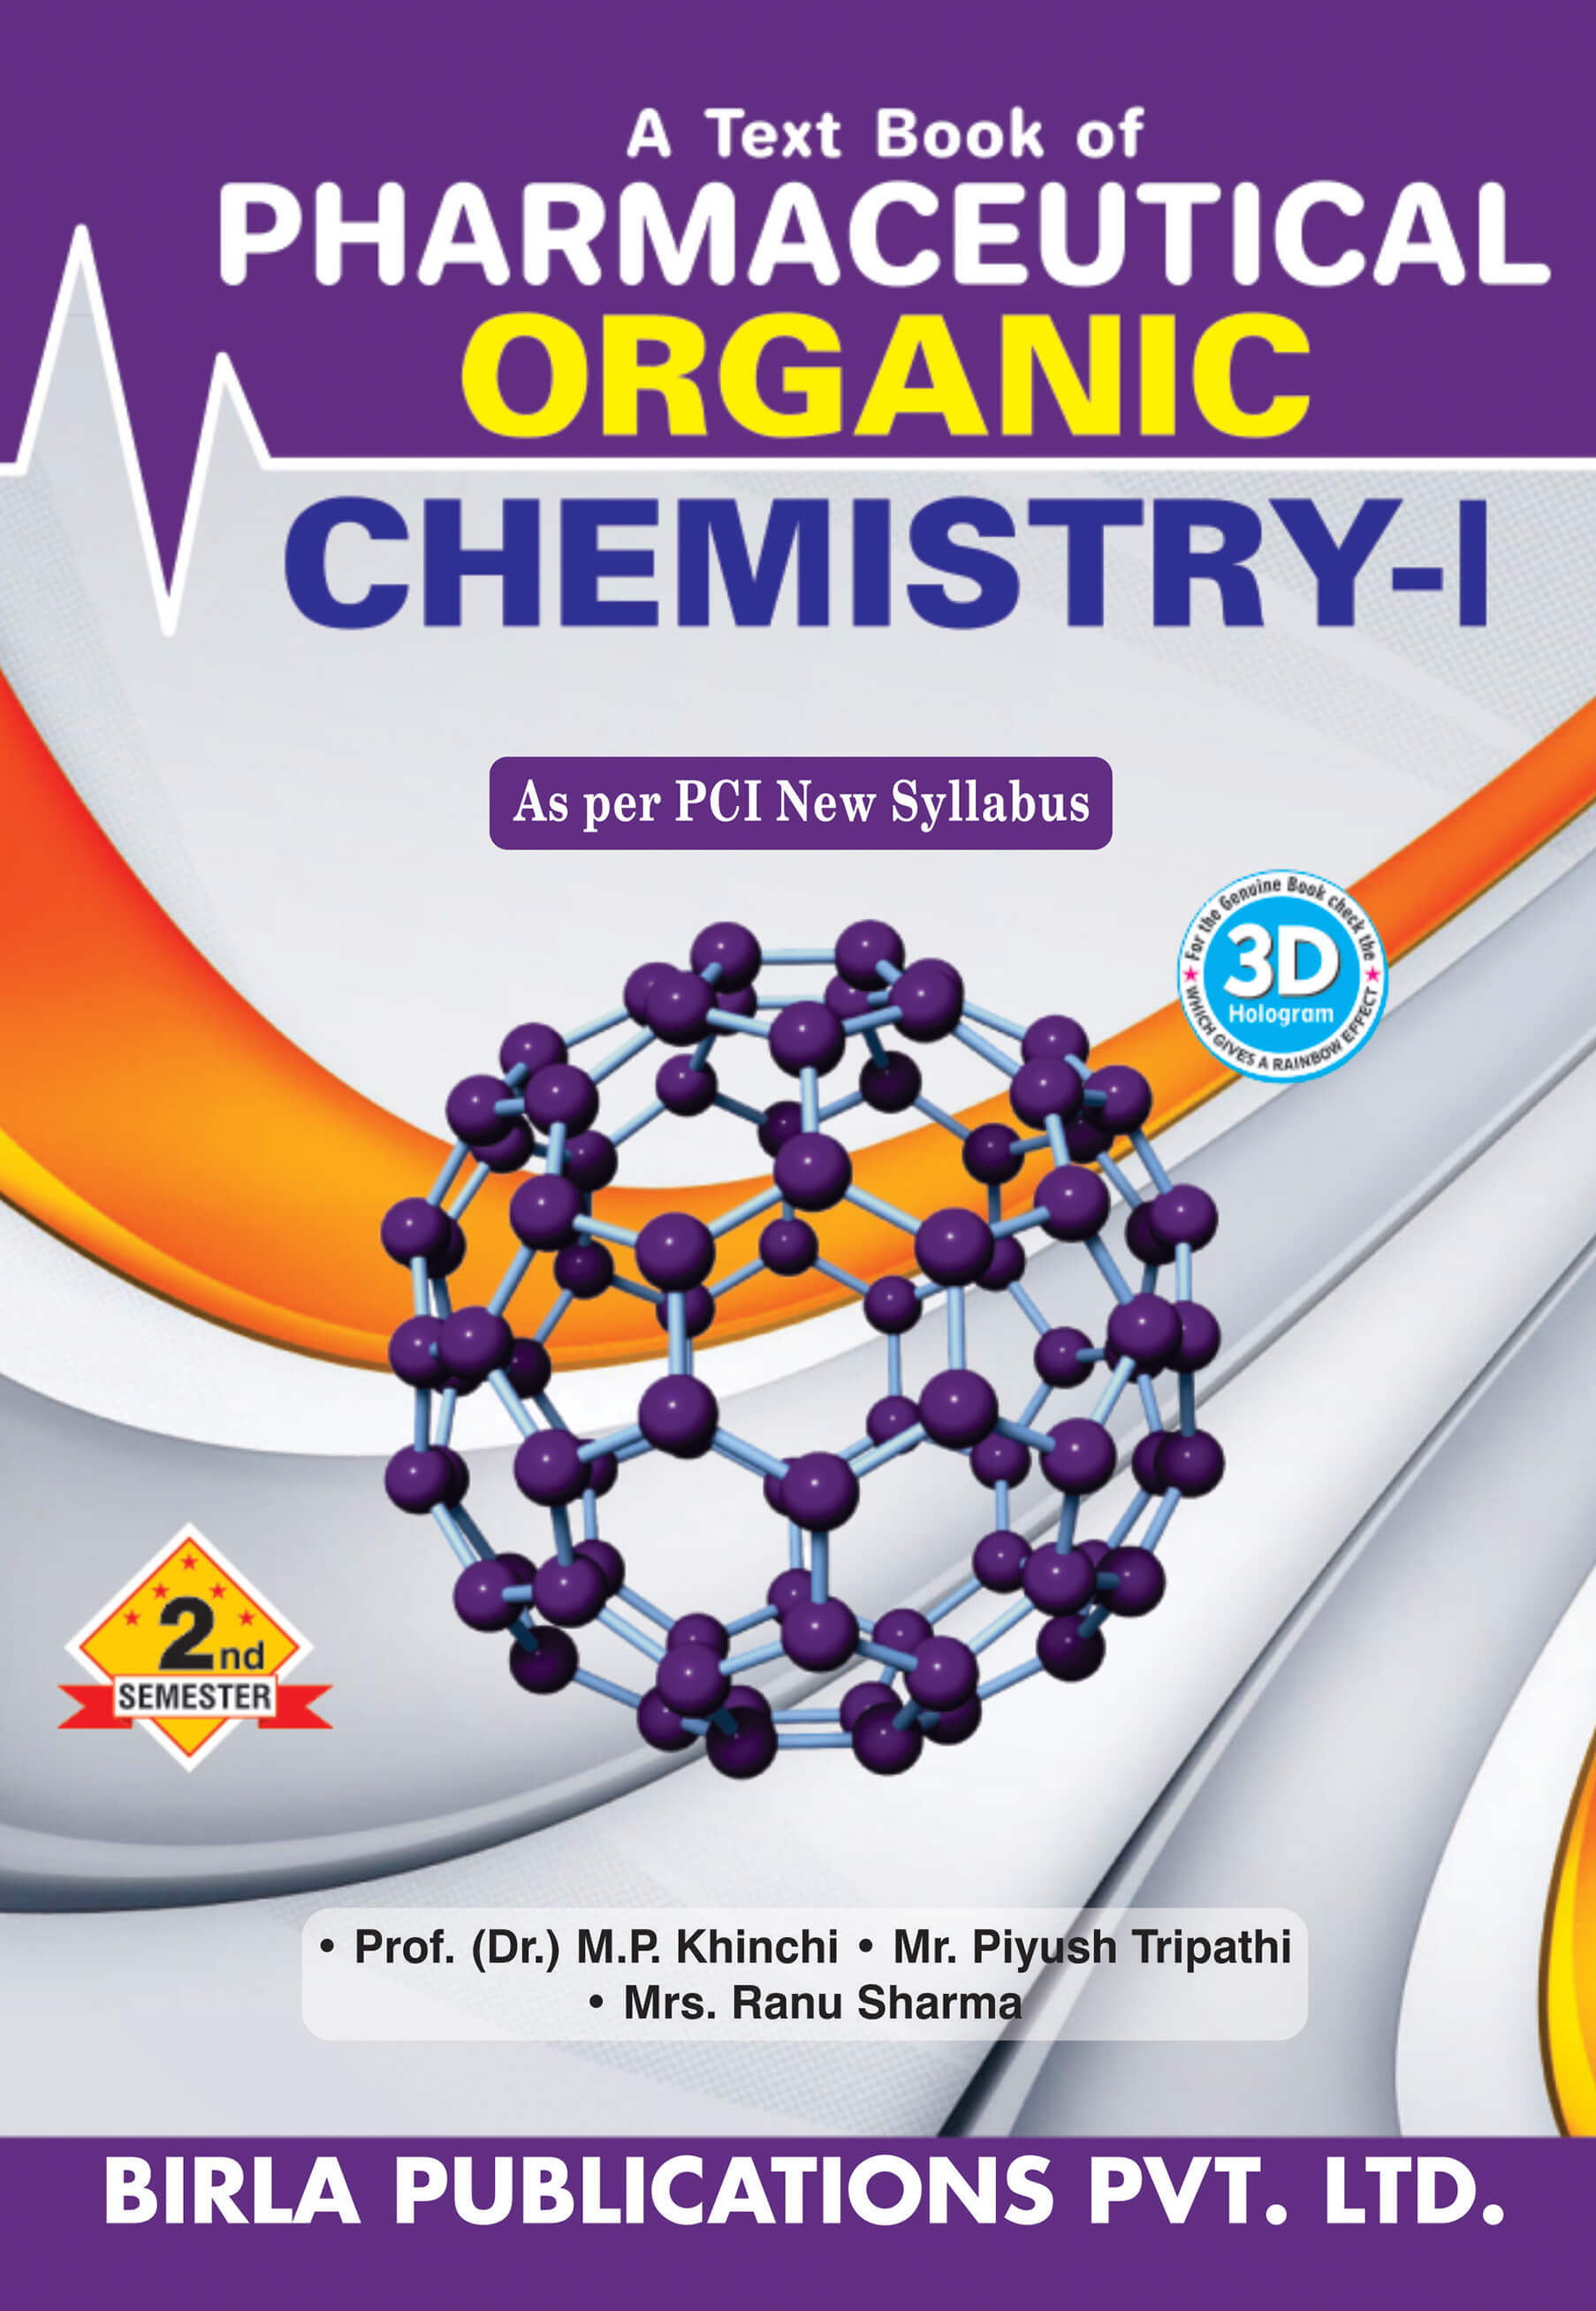 A TEXT BOOK OF PHARMACEUTICAL ORGANIC CHEMISTRY-I